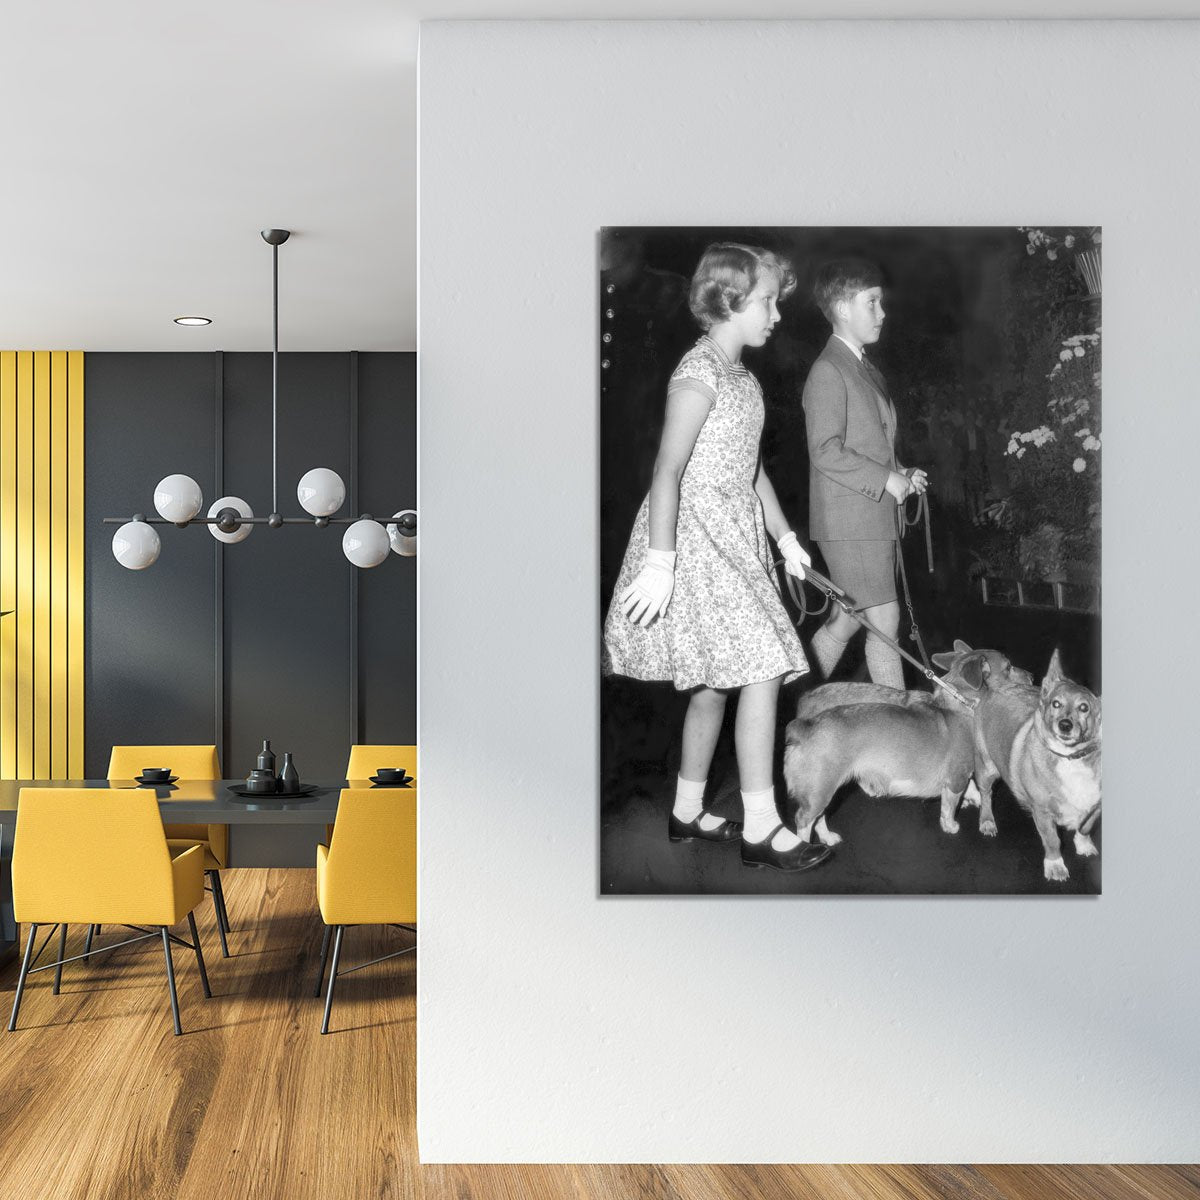 Prince Charles with Princess Anne as children with pet dogs Canvas Print or Poster